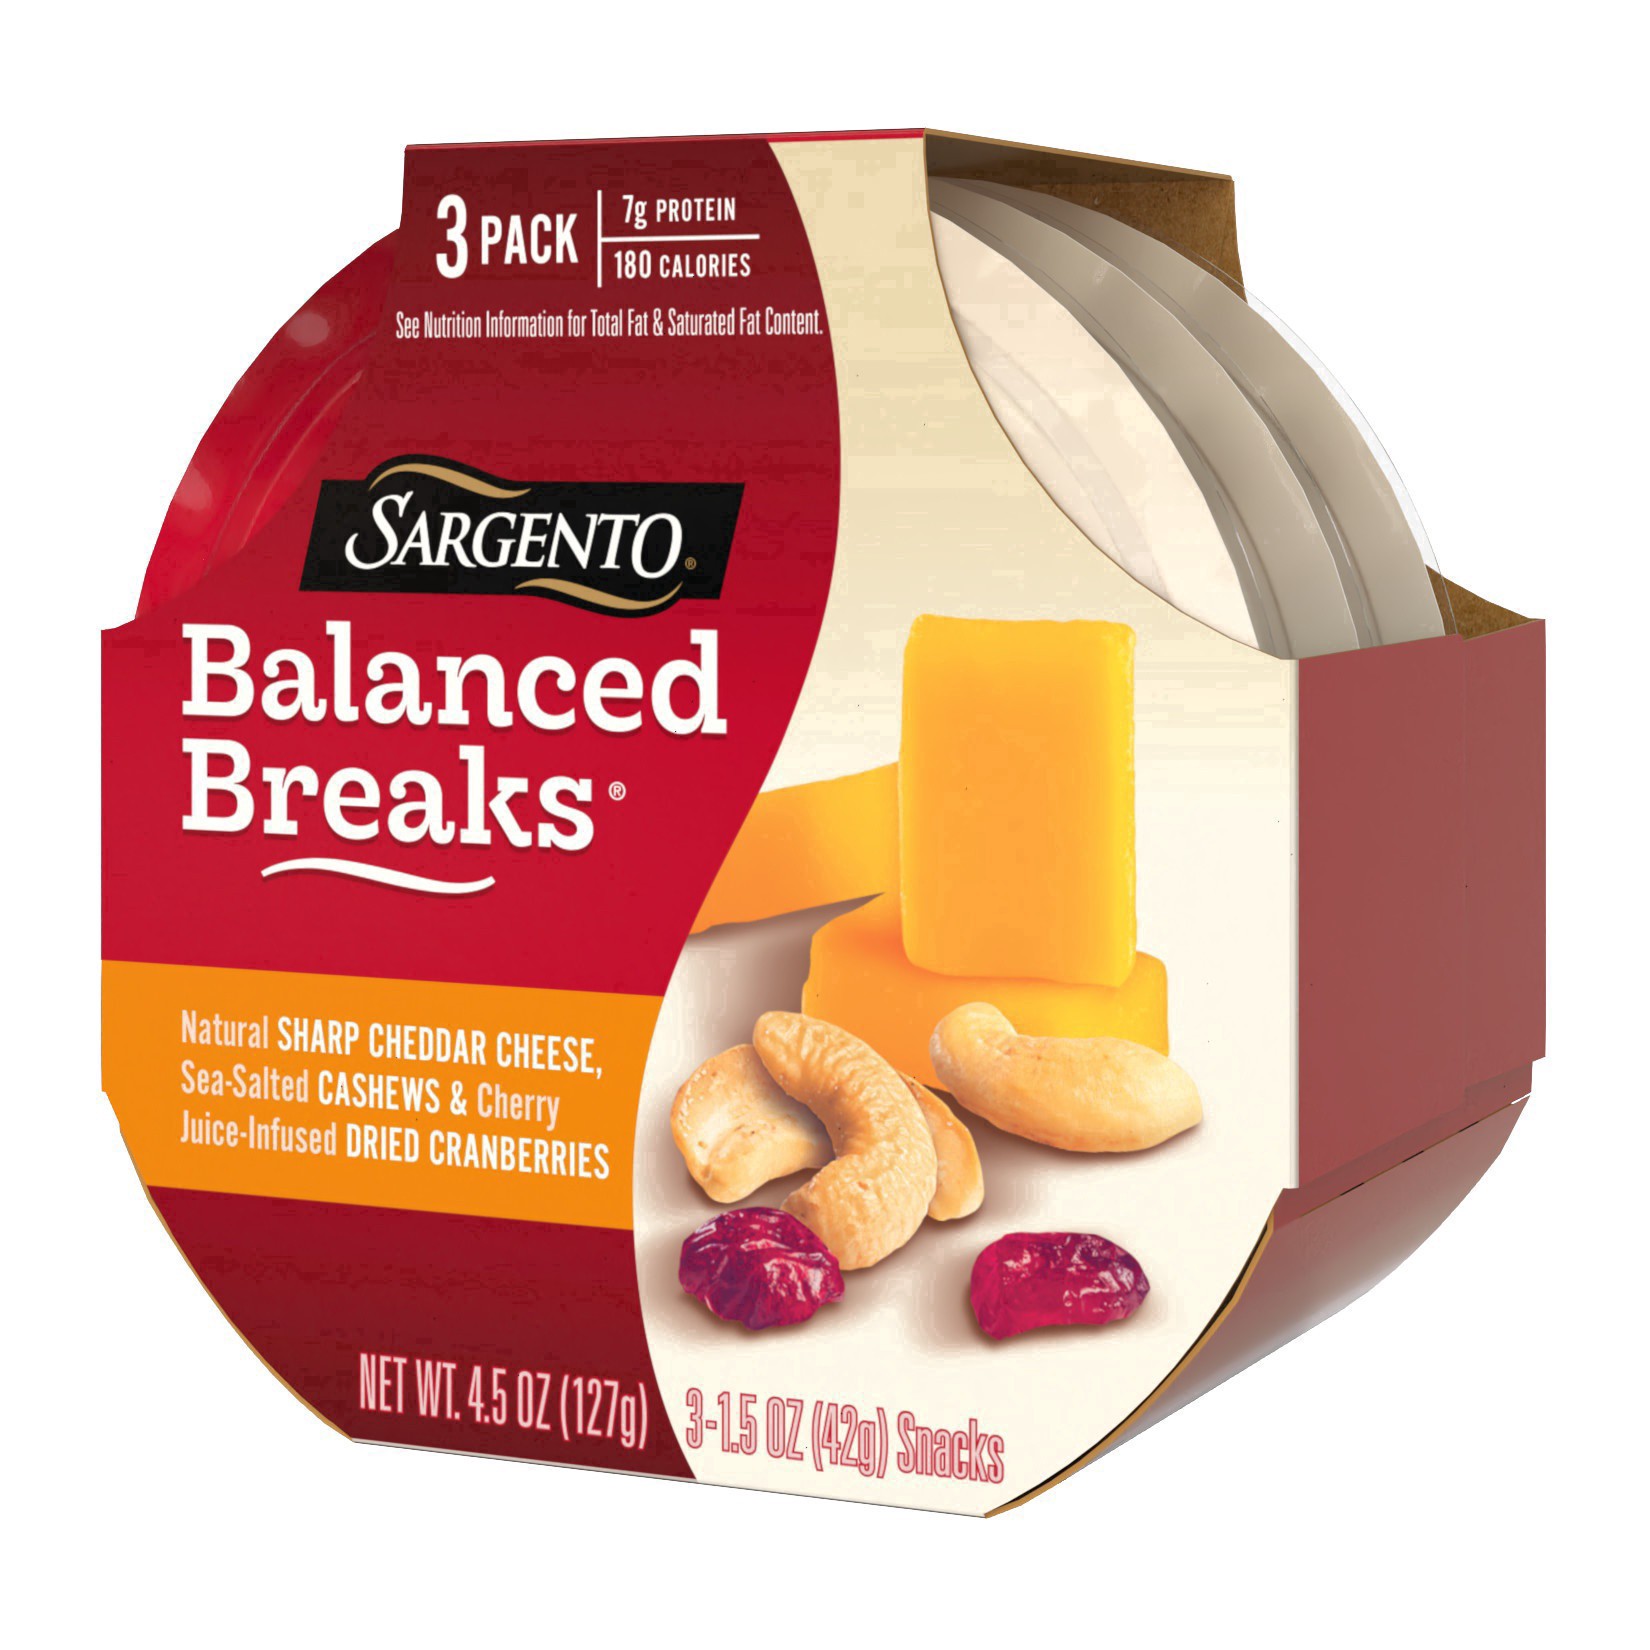 slide 6 of 34, Sargento Balanced Breaks Natural Sharp Cheddar Cheese, Sea-Salted Cashews and Cherry Juice-Infused Dried Cranberries, 3-Pack, 3 ct